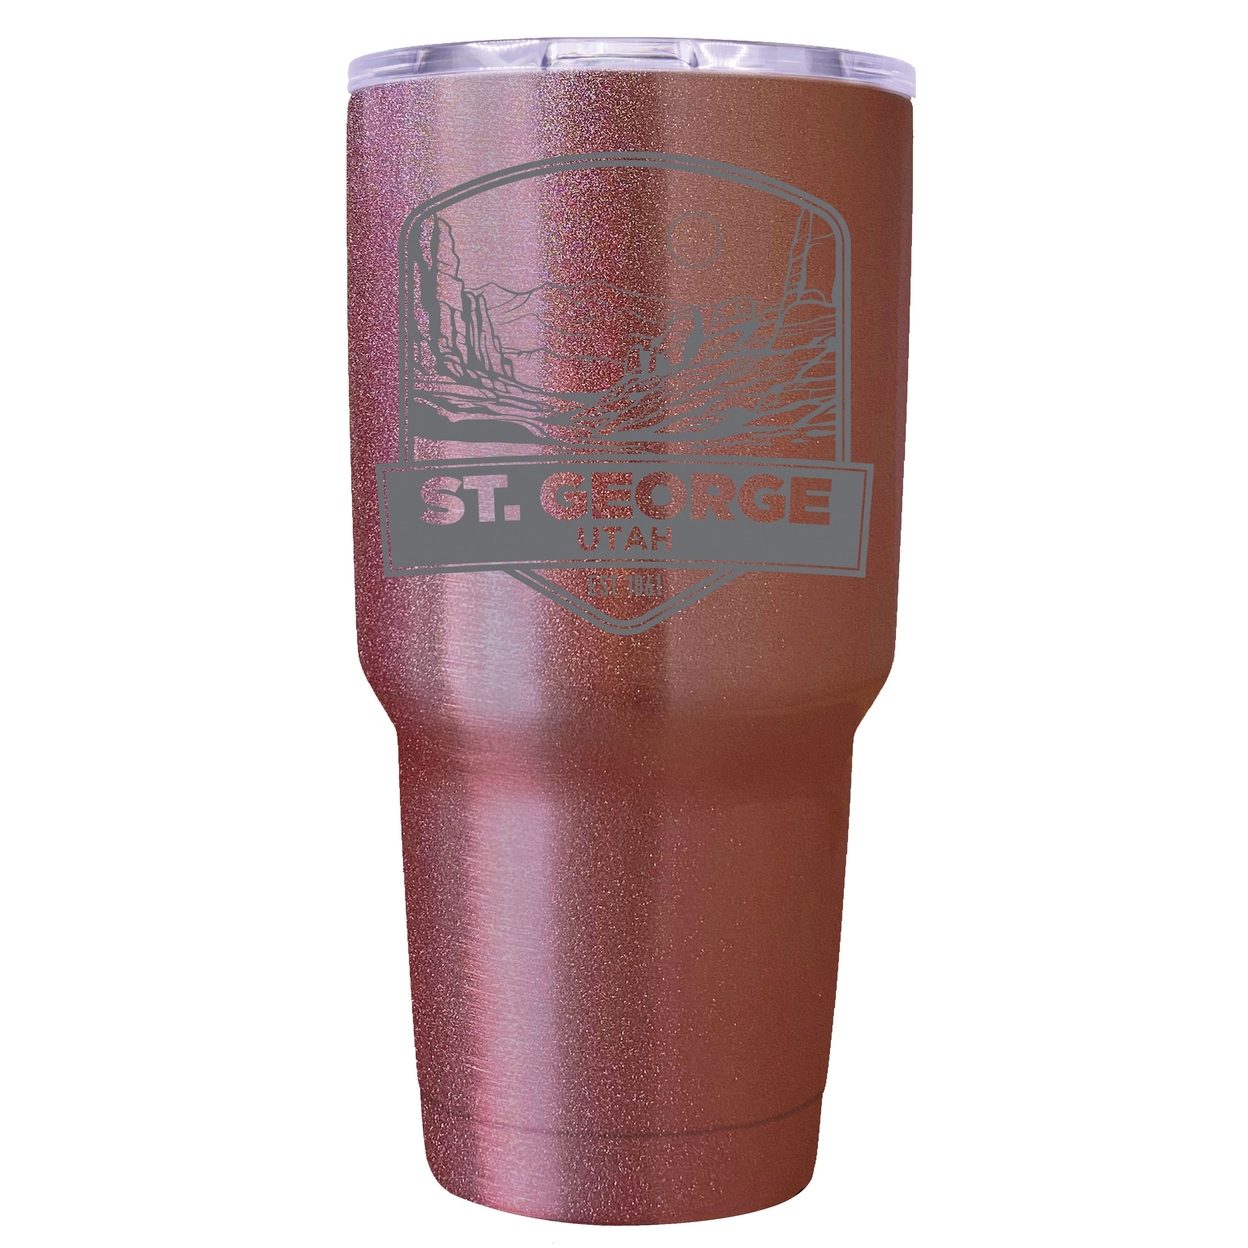 St. George Utah Souvenir 24 Oz Engraved Insulated Stainless Steel Tumbler - Green,,4-Pack